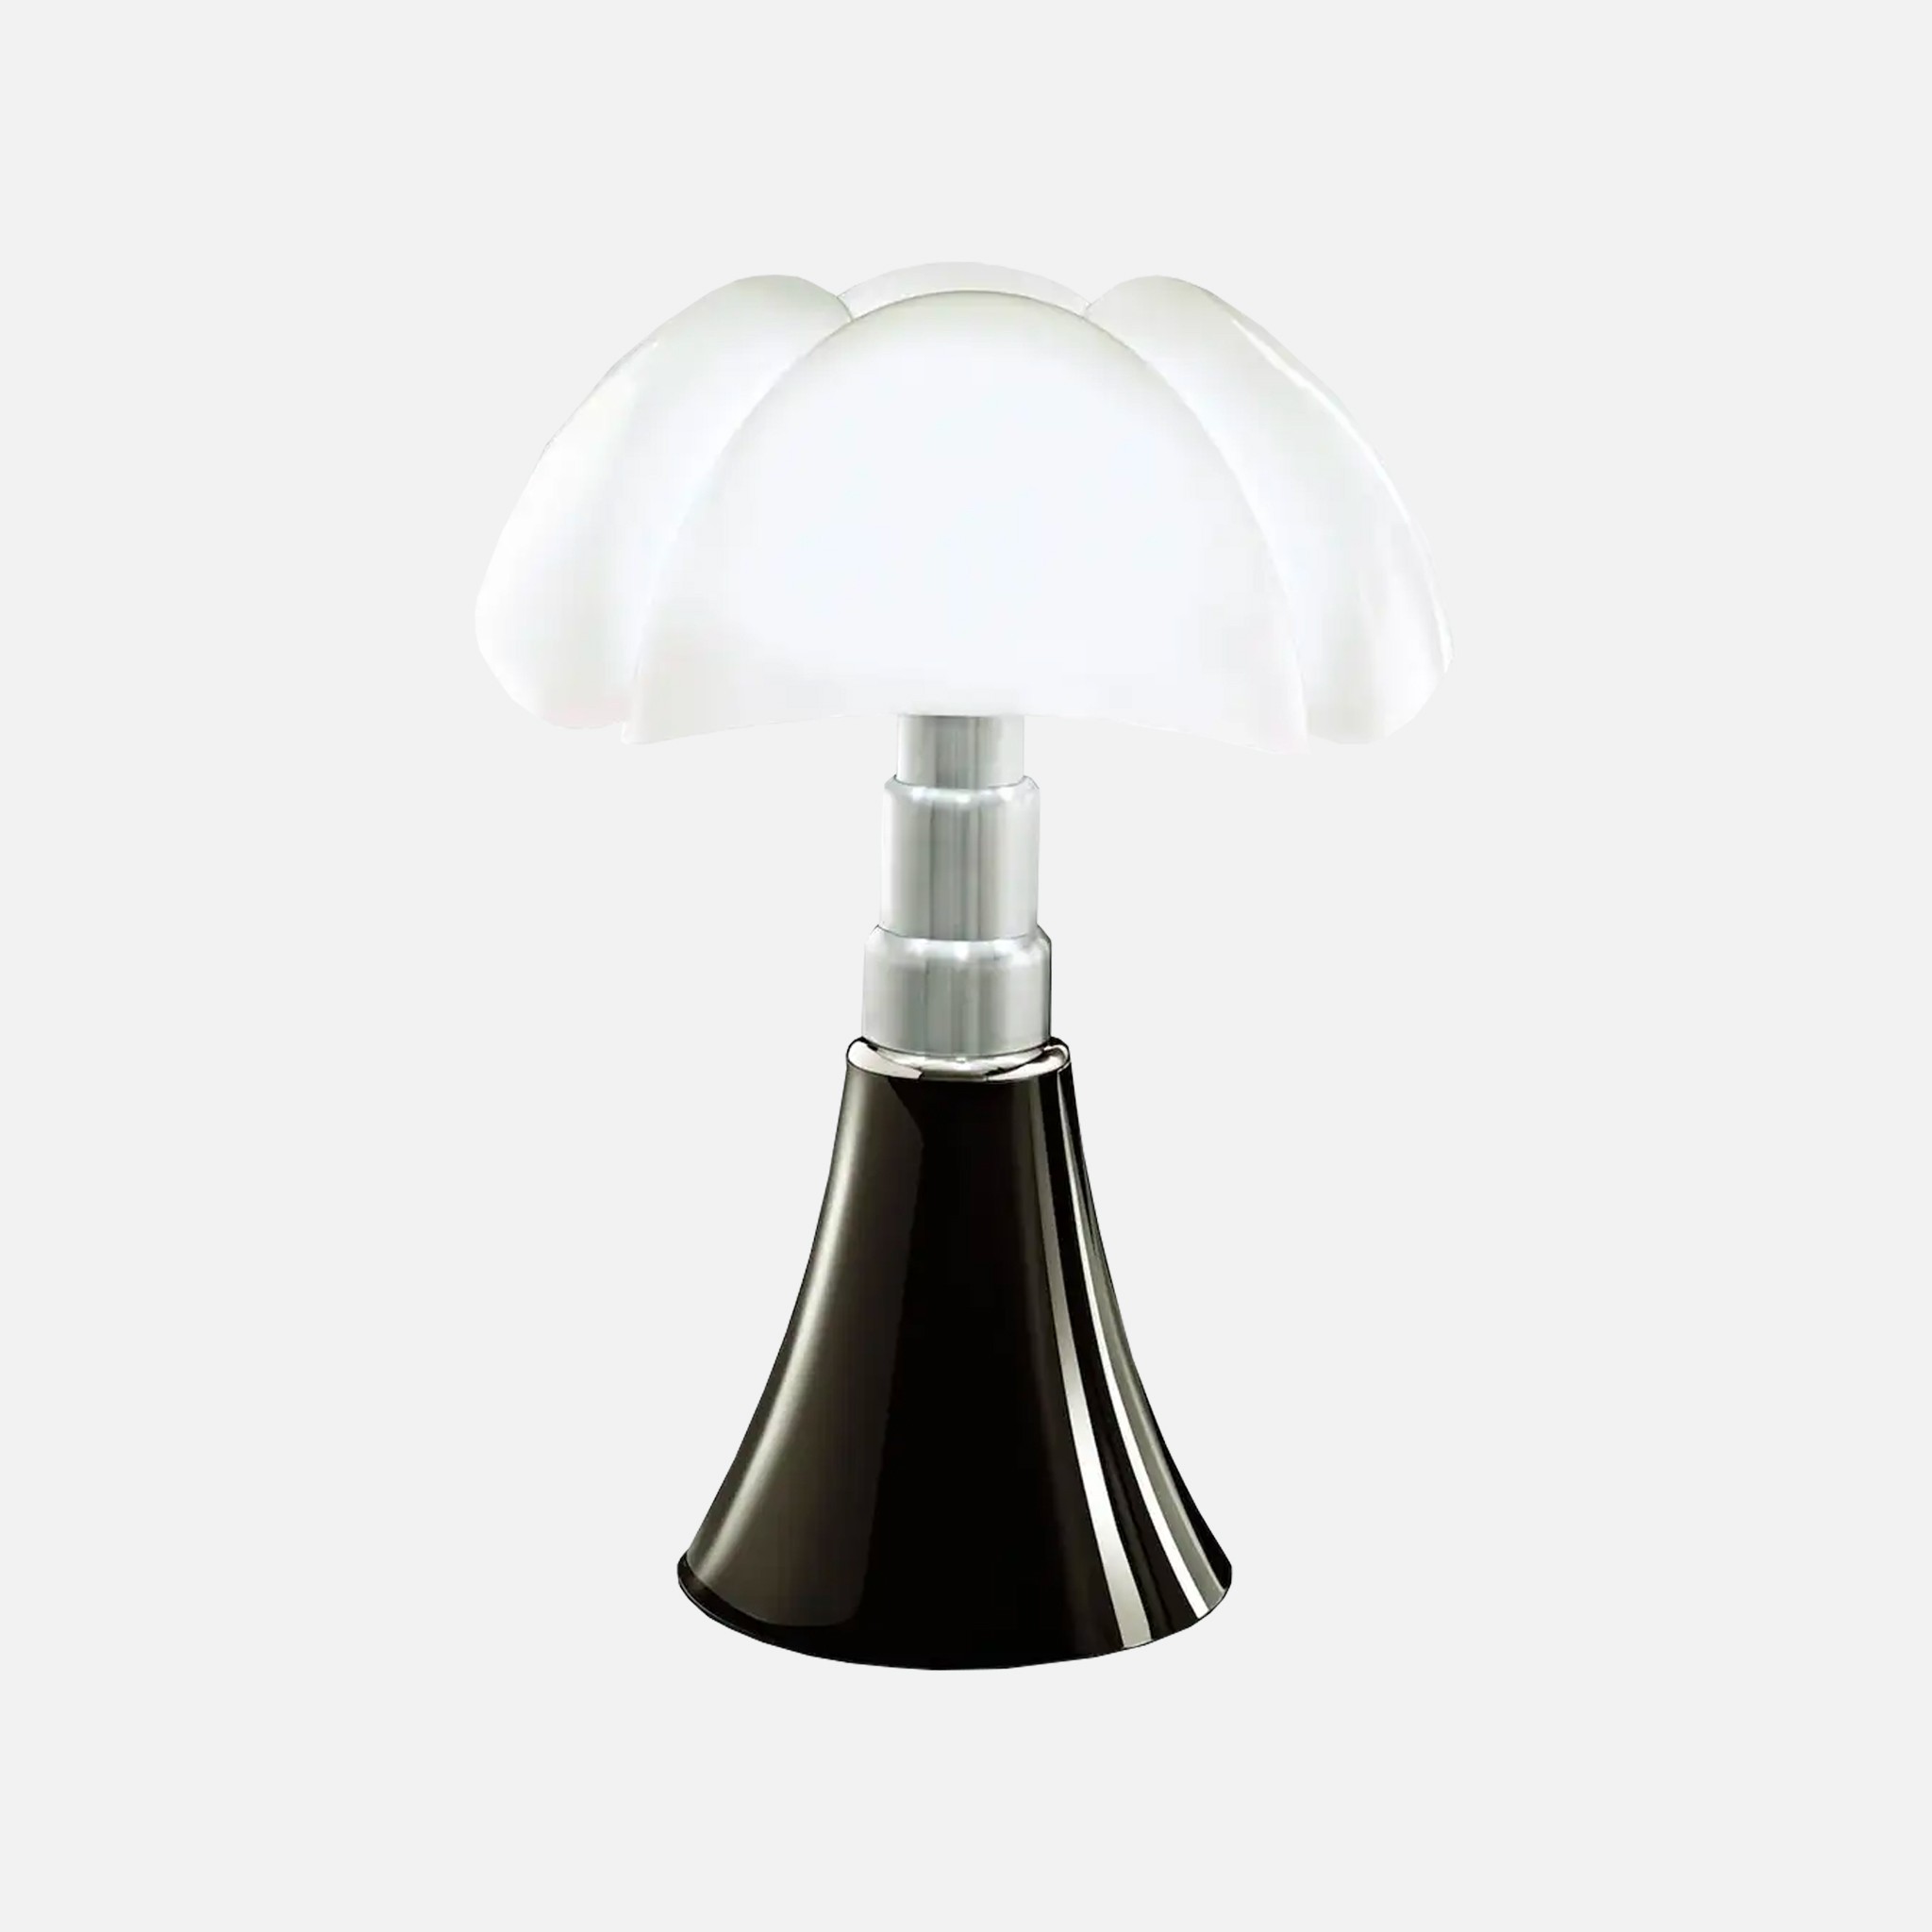 The image of an Gae Aulenti Pipistrello Table Lamp product